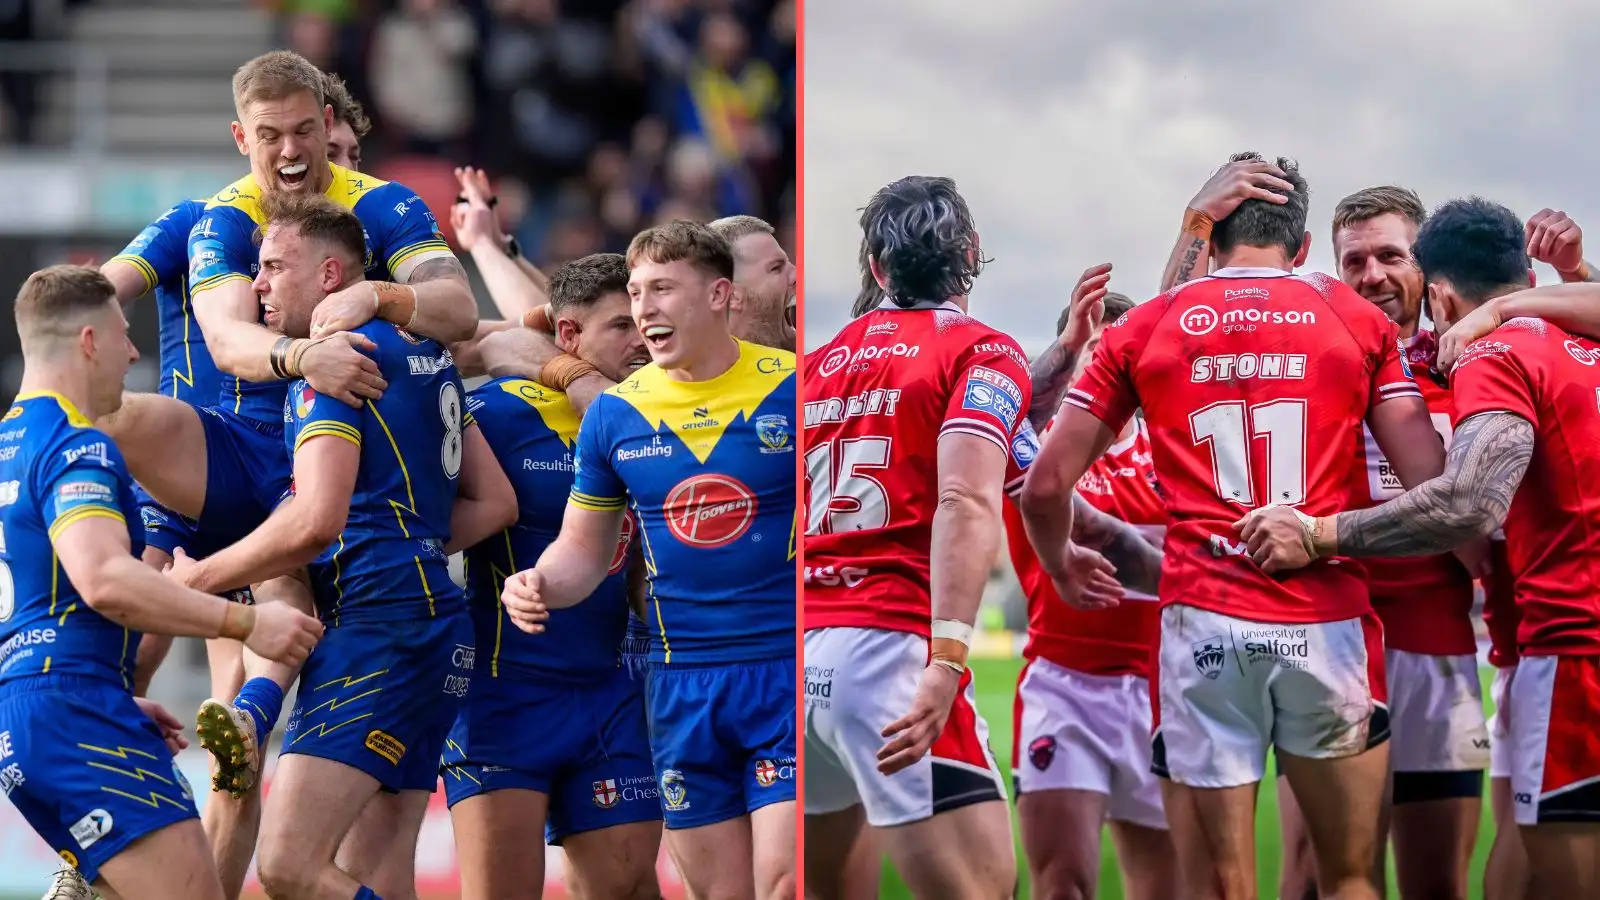 The Debrief: Warrington edge out Leigh in thriller, Salford get job done at London, King Vuniyayawa sees red